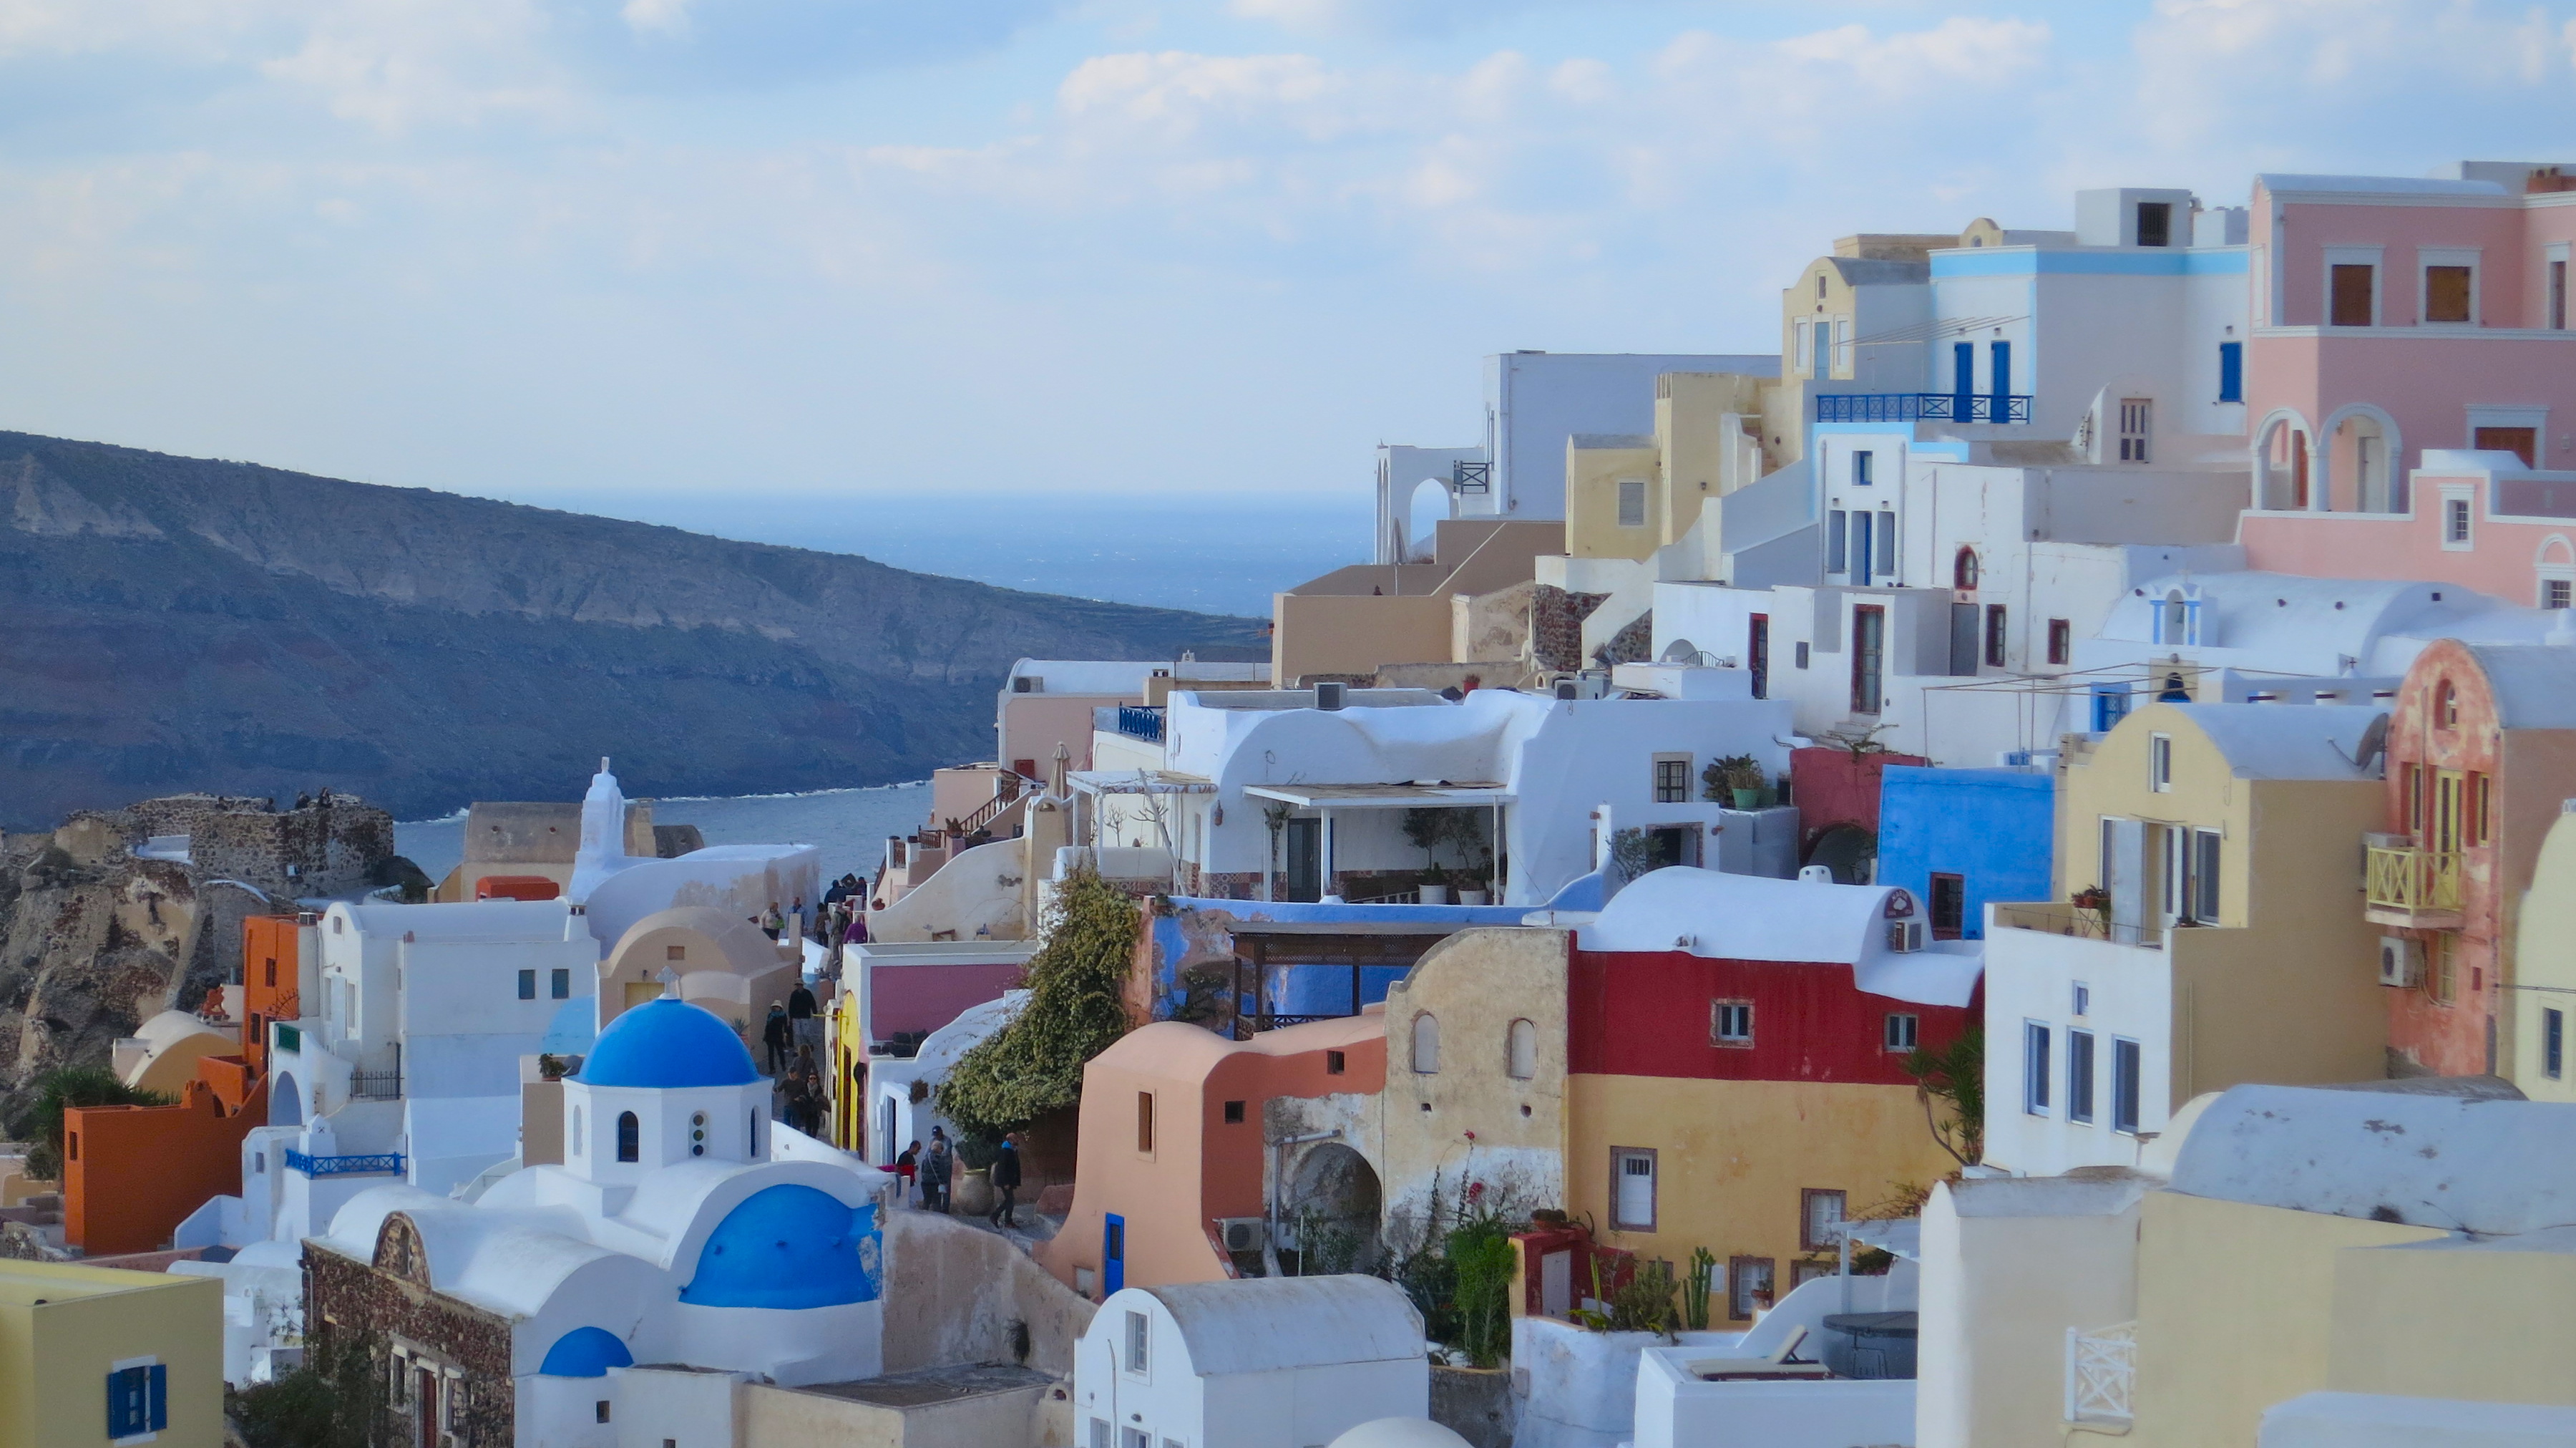 Buildings cascade down the cliffs on the Greek island of Santorini located in the Aegean Sea.